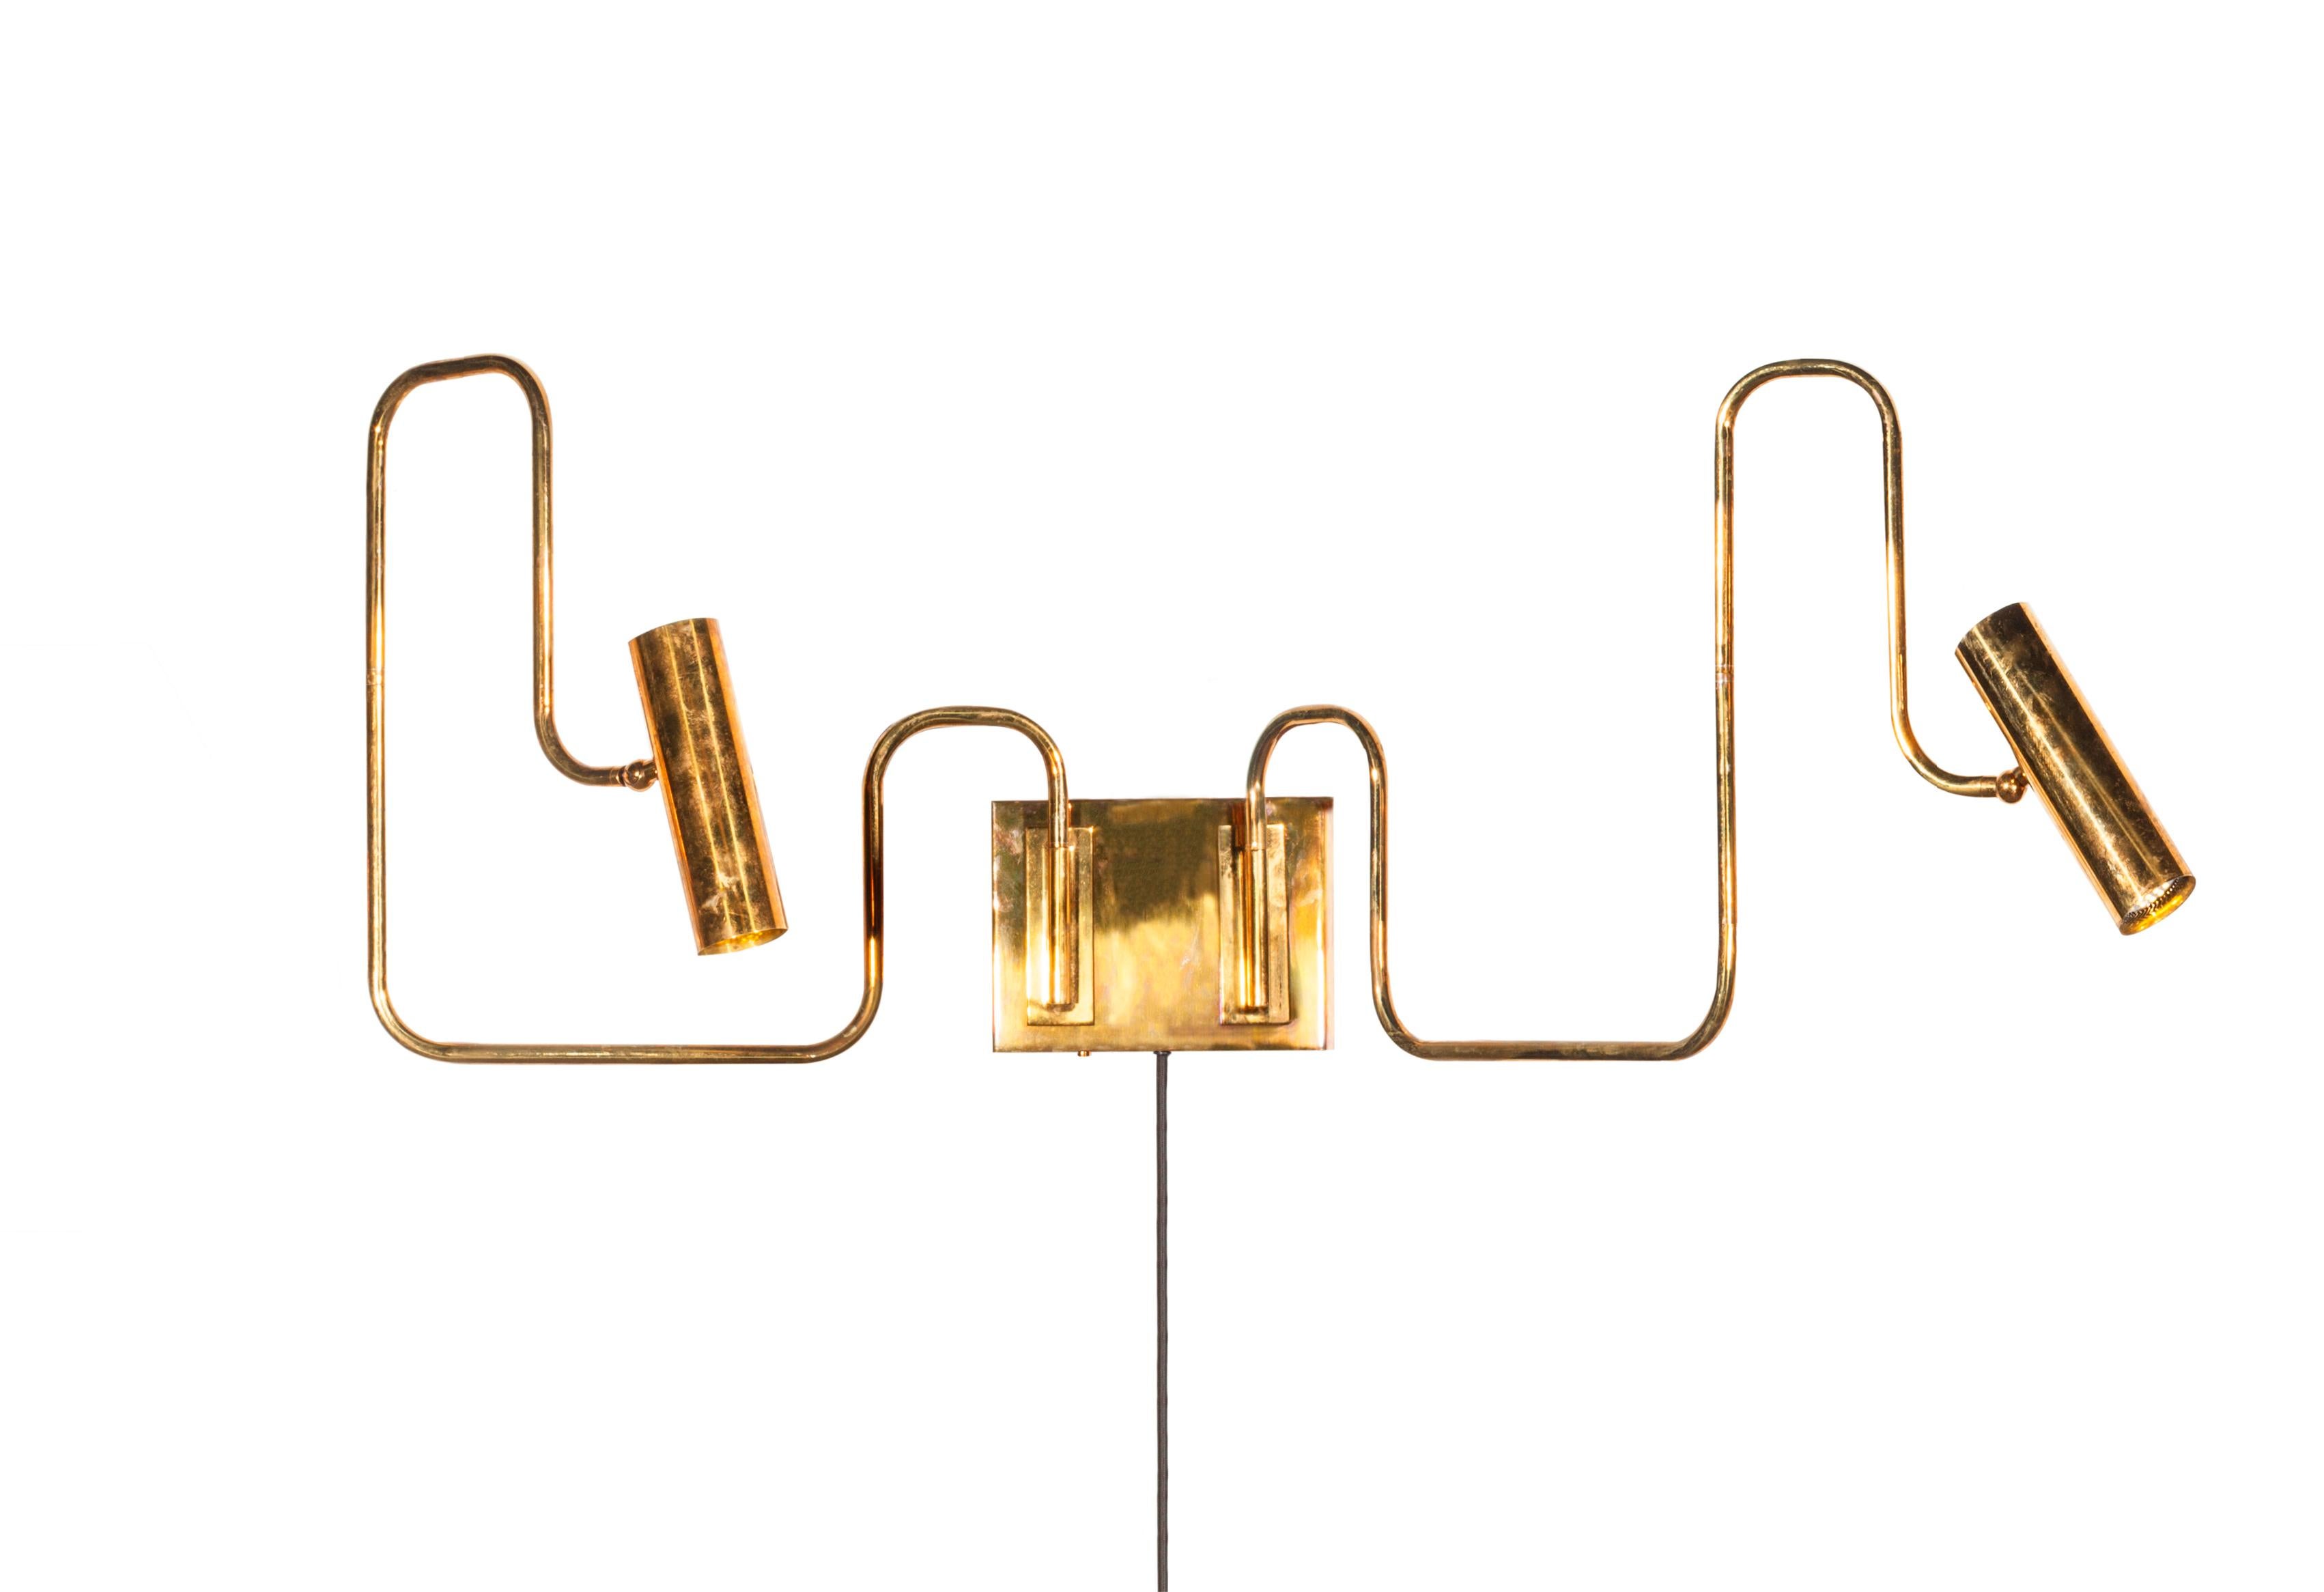 Pivot double wall lamp by Gentner Design.
Dimensions: D 140 x W 5 x H 40.6 cm.
Materials: hand rubbed brass.
Available in polished tarnished brass, darkened brass and hand rubbed brass.

All our lamps can be wired according to each country. If